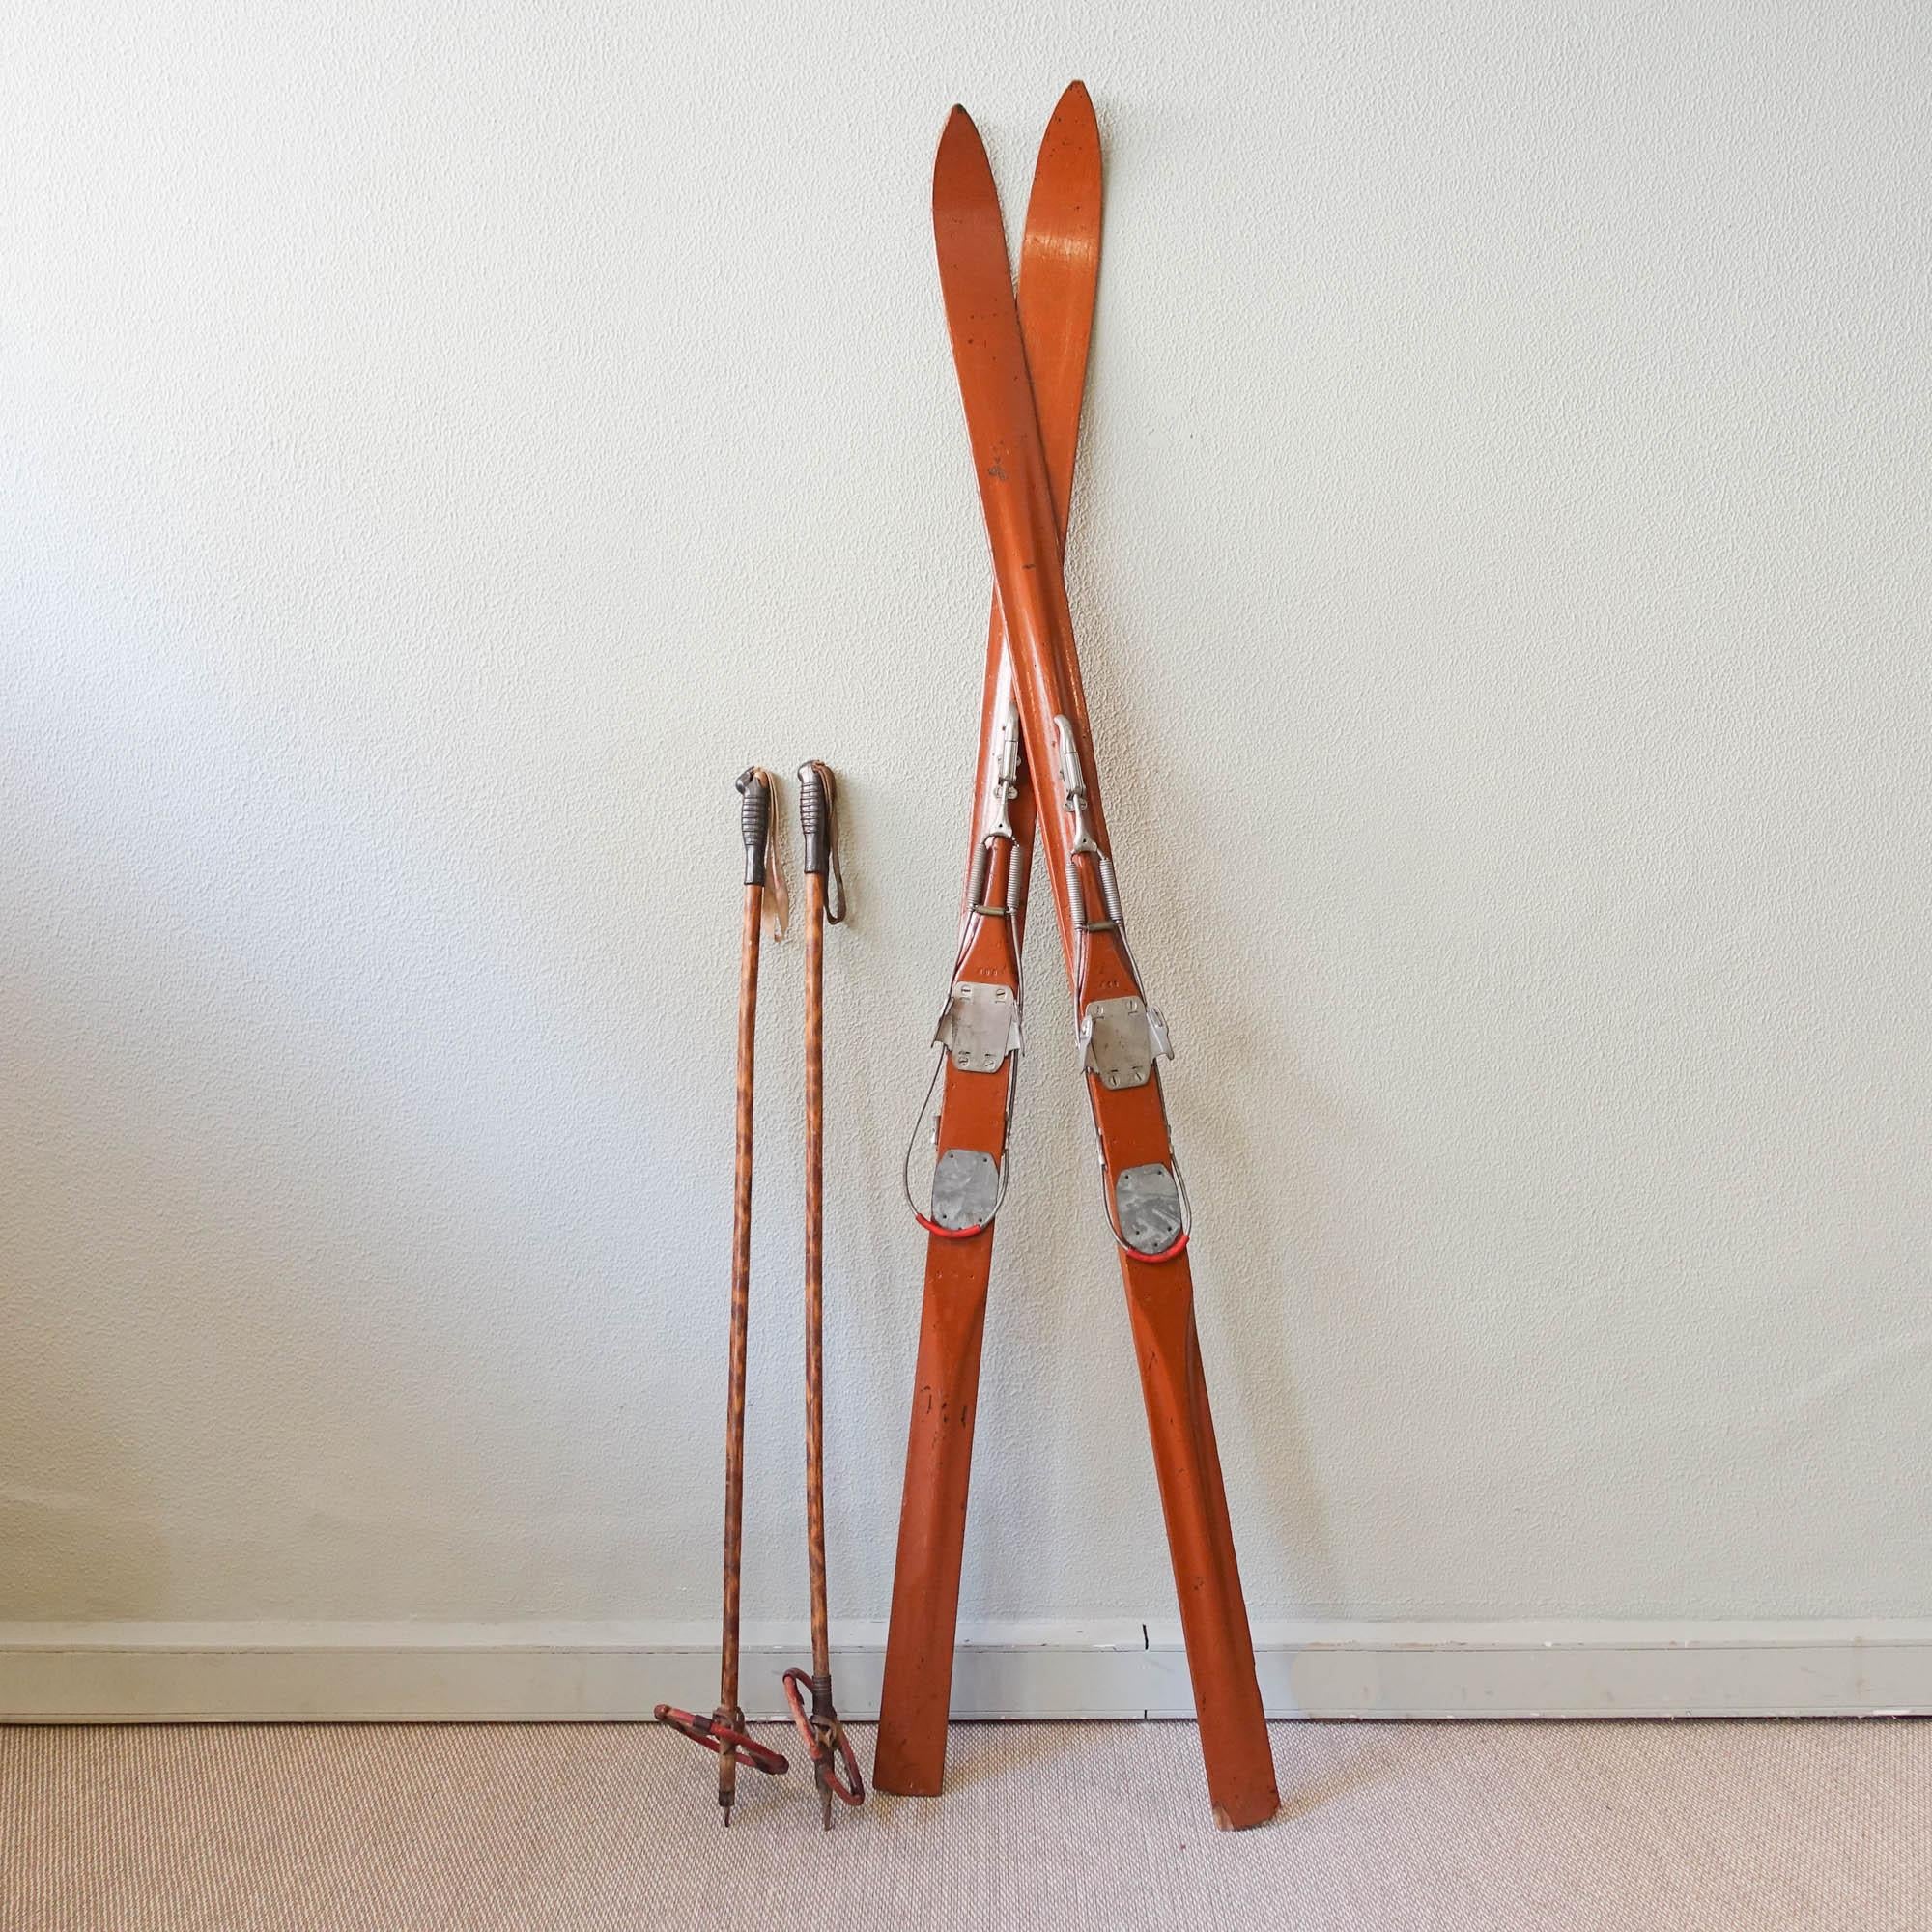 This set of ski equipment, was produced by Heinrich Hammer, in Germany, during the 1930s. These antique skis in painted wood, come with kandahar and geze bindings with antique wood ski poles. The ski poles have the top in rubber with leather loops,